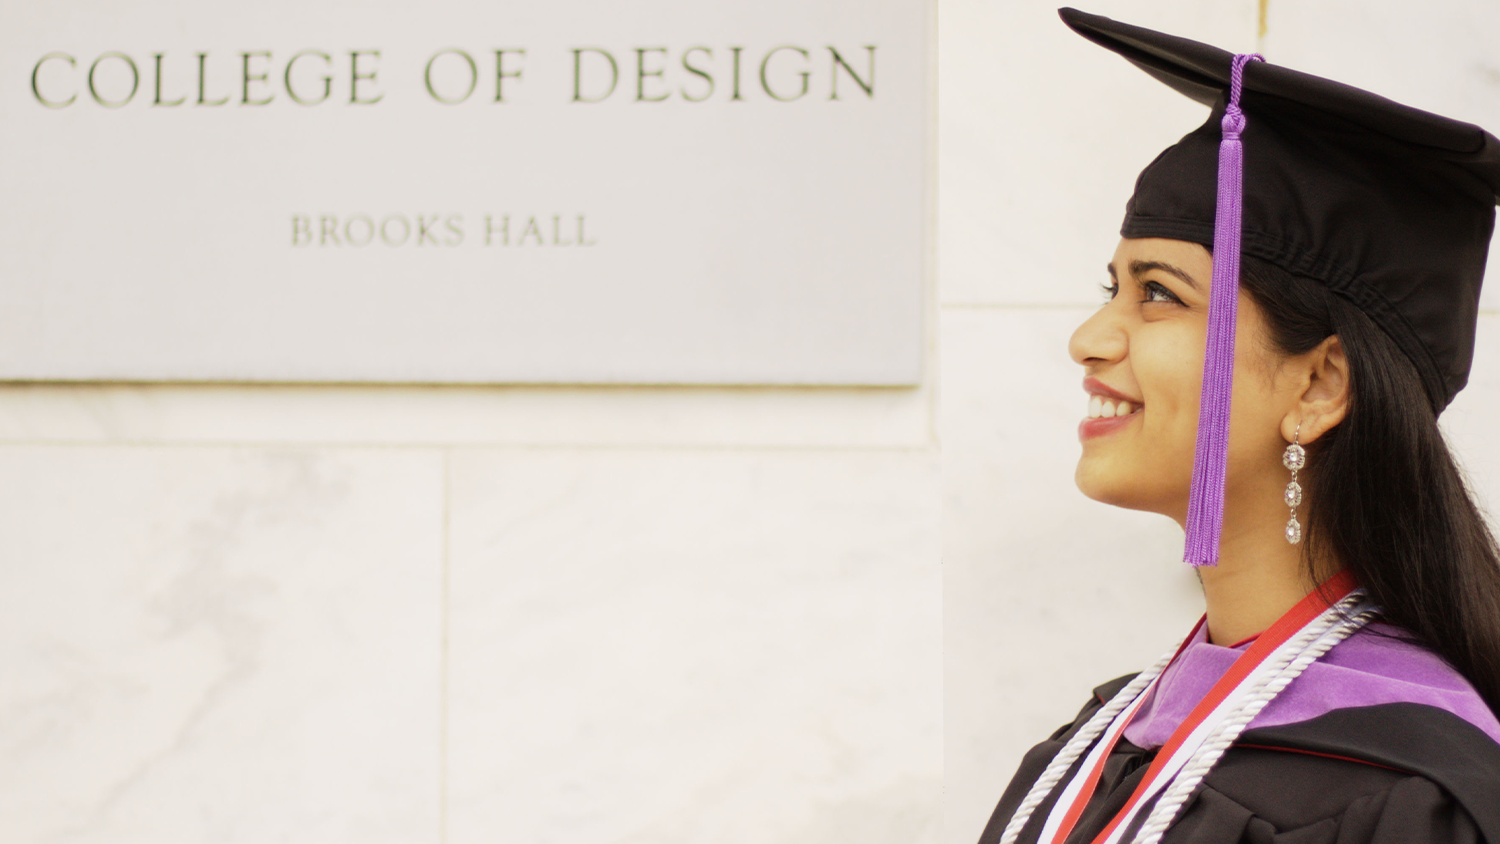 A graduate in their gown standing next to the College of Design.